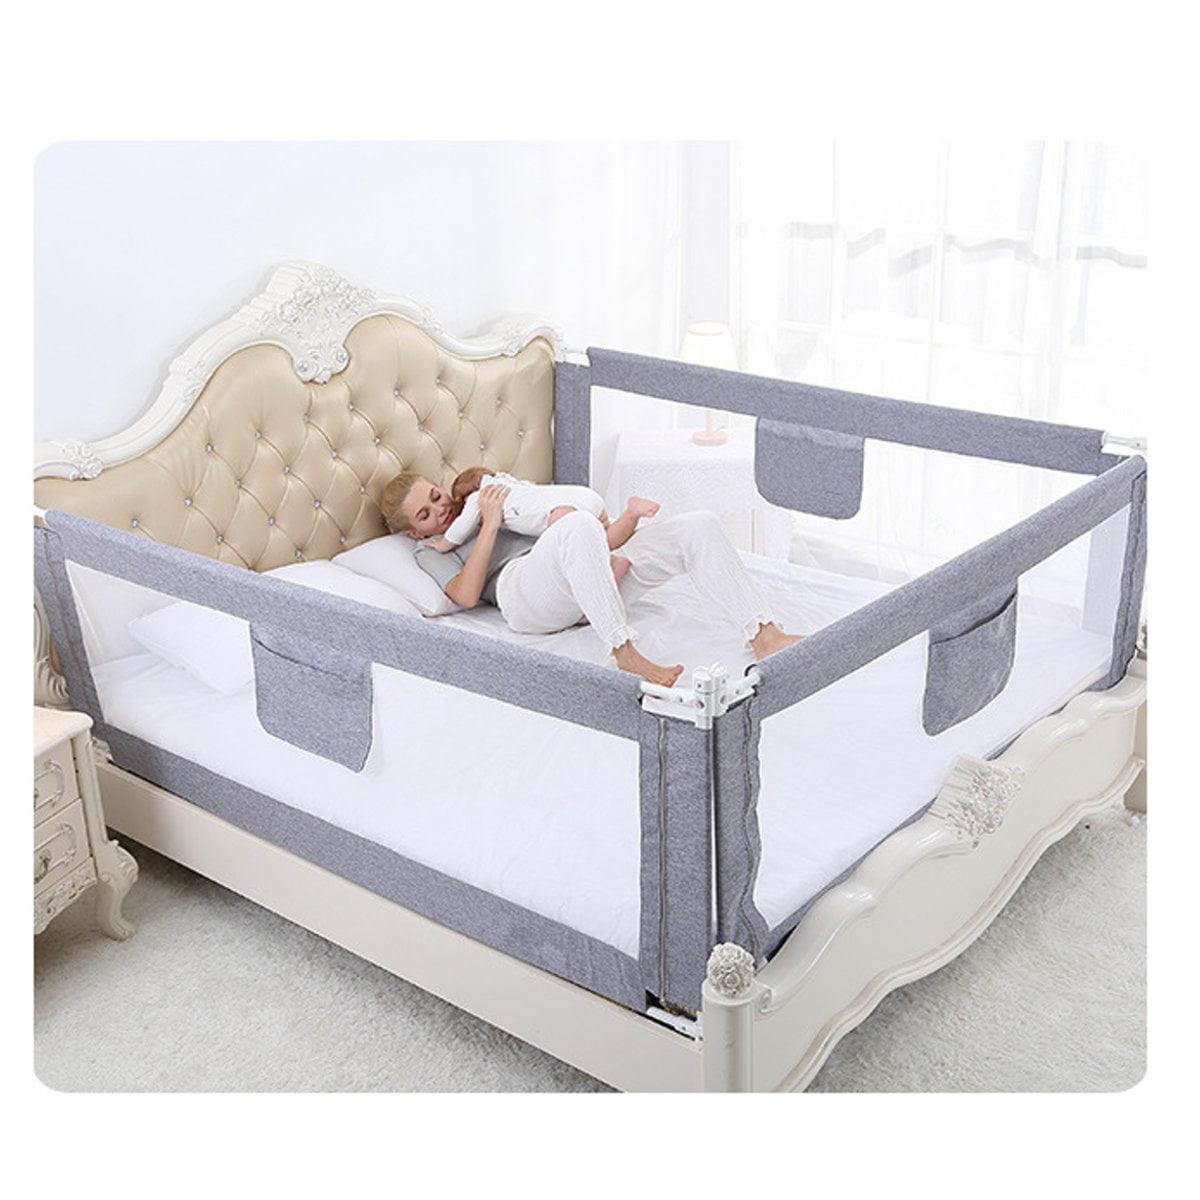 Toddlers Infants-Grey Color Queen Size Bed Safety Bed GuardRail Bed Fence for Children 2 M for length side and 1.5 M for feet side 2 Set for 2 Sides